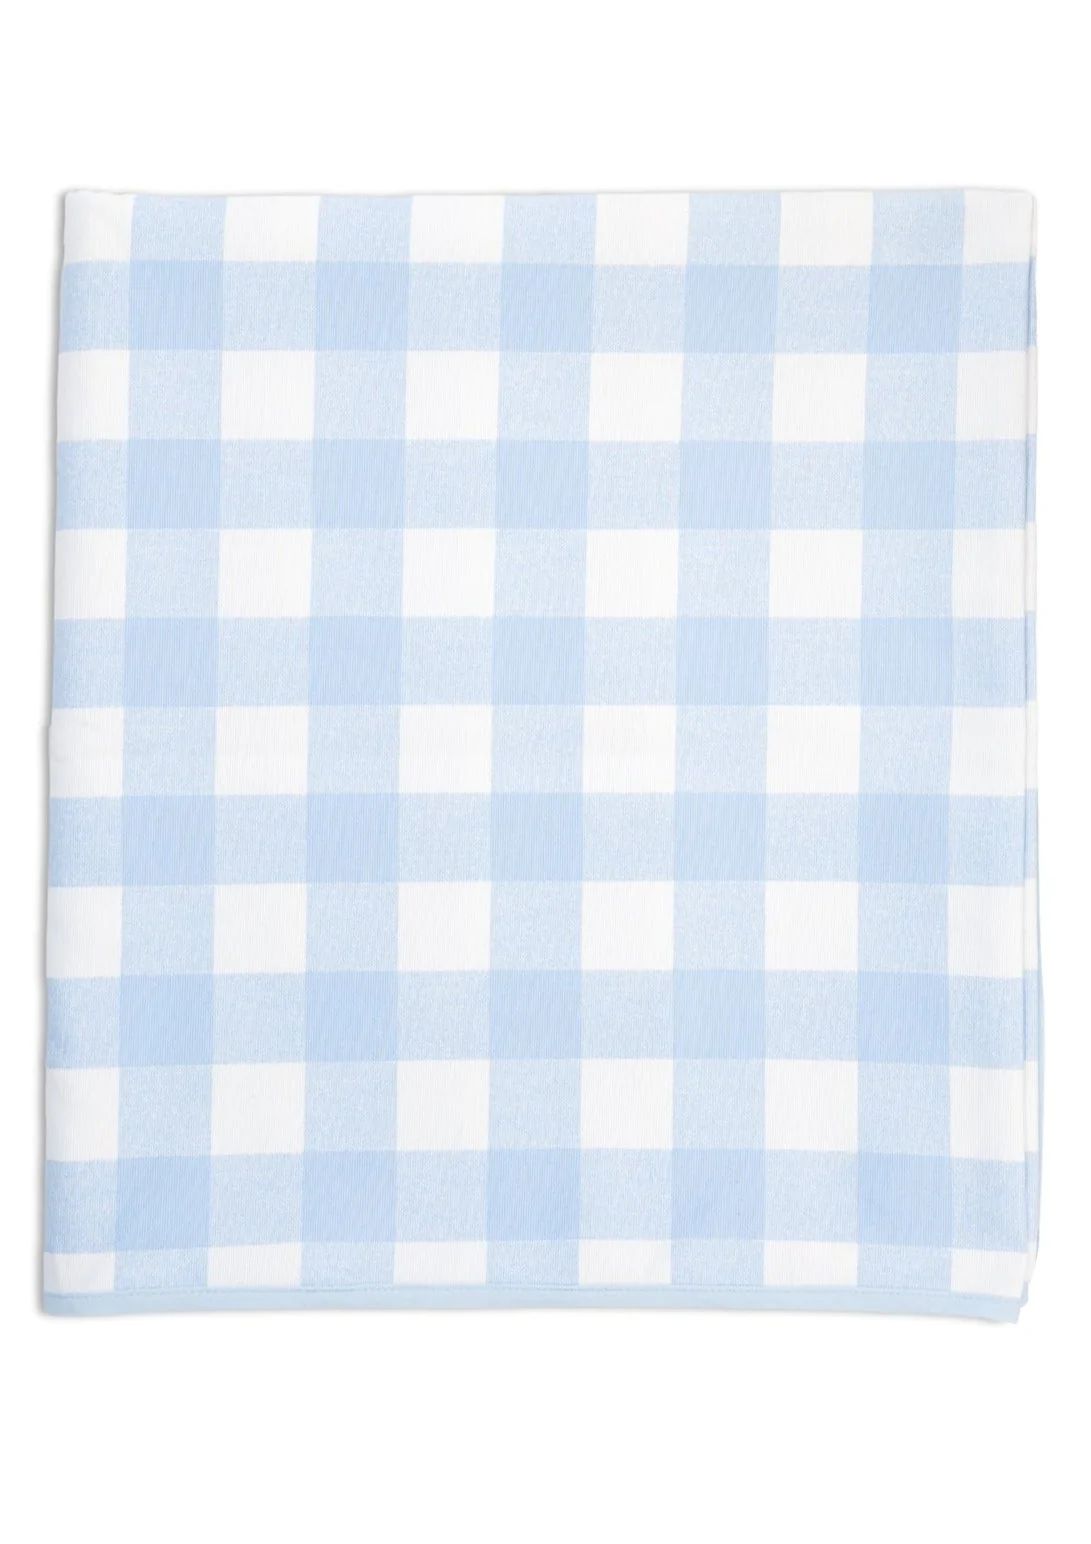 Chloe Gingham Tablecloth in Blue | Over The Moon